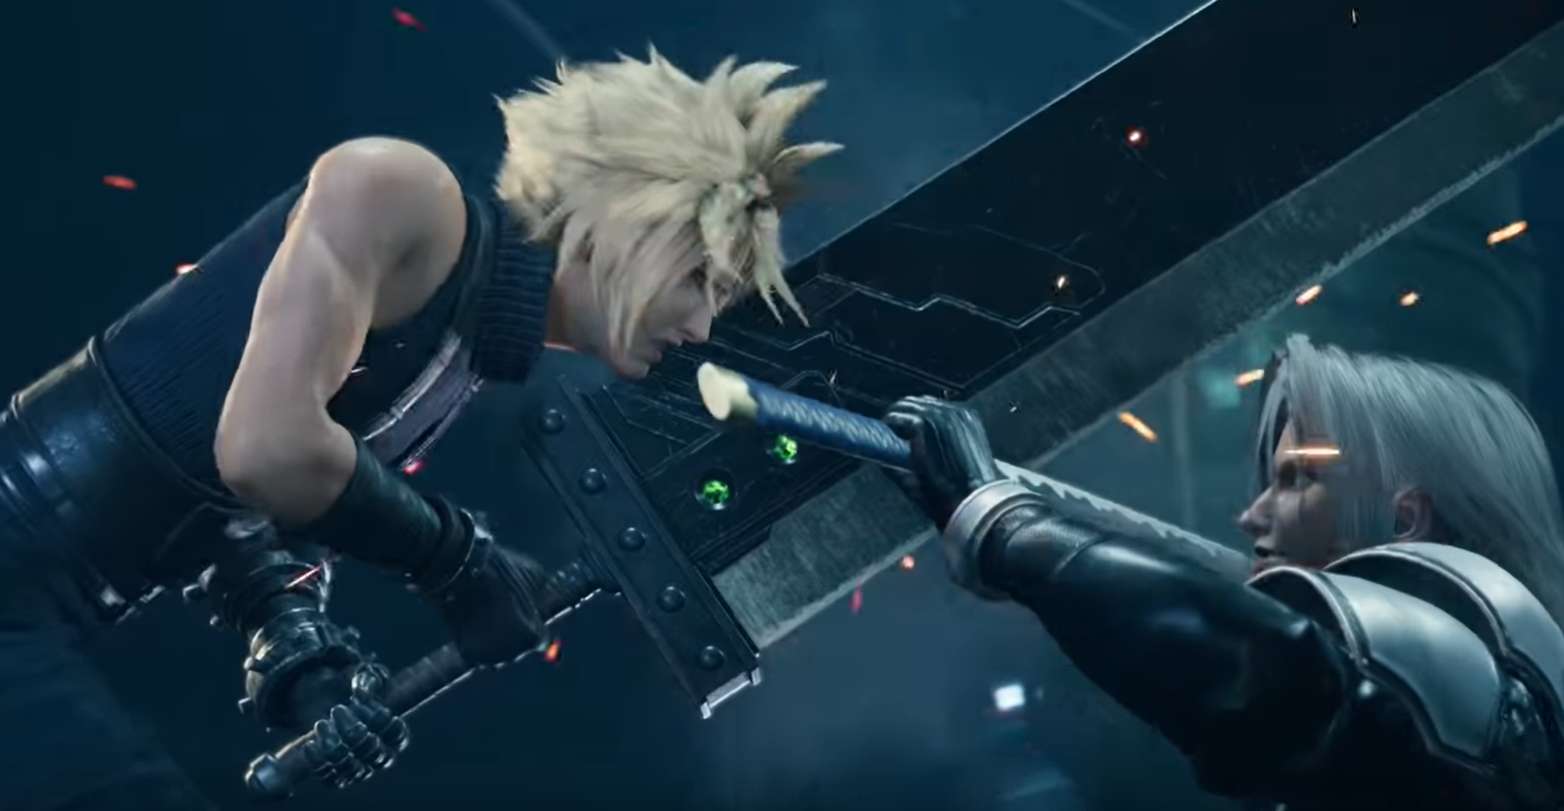 New Final Fantasy 7 Remake Trailer Is Released To Appeal To Gamers Who Missed Its April Release